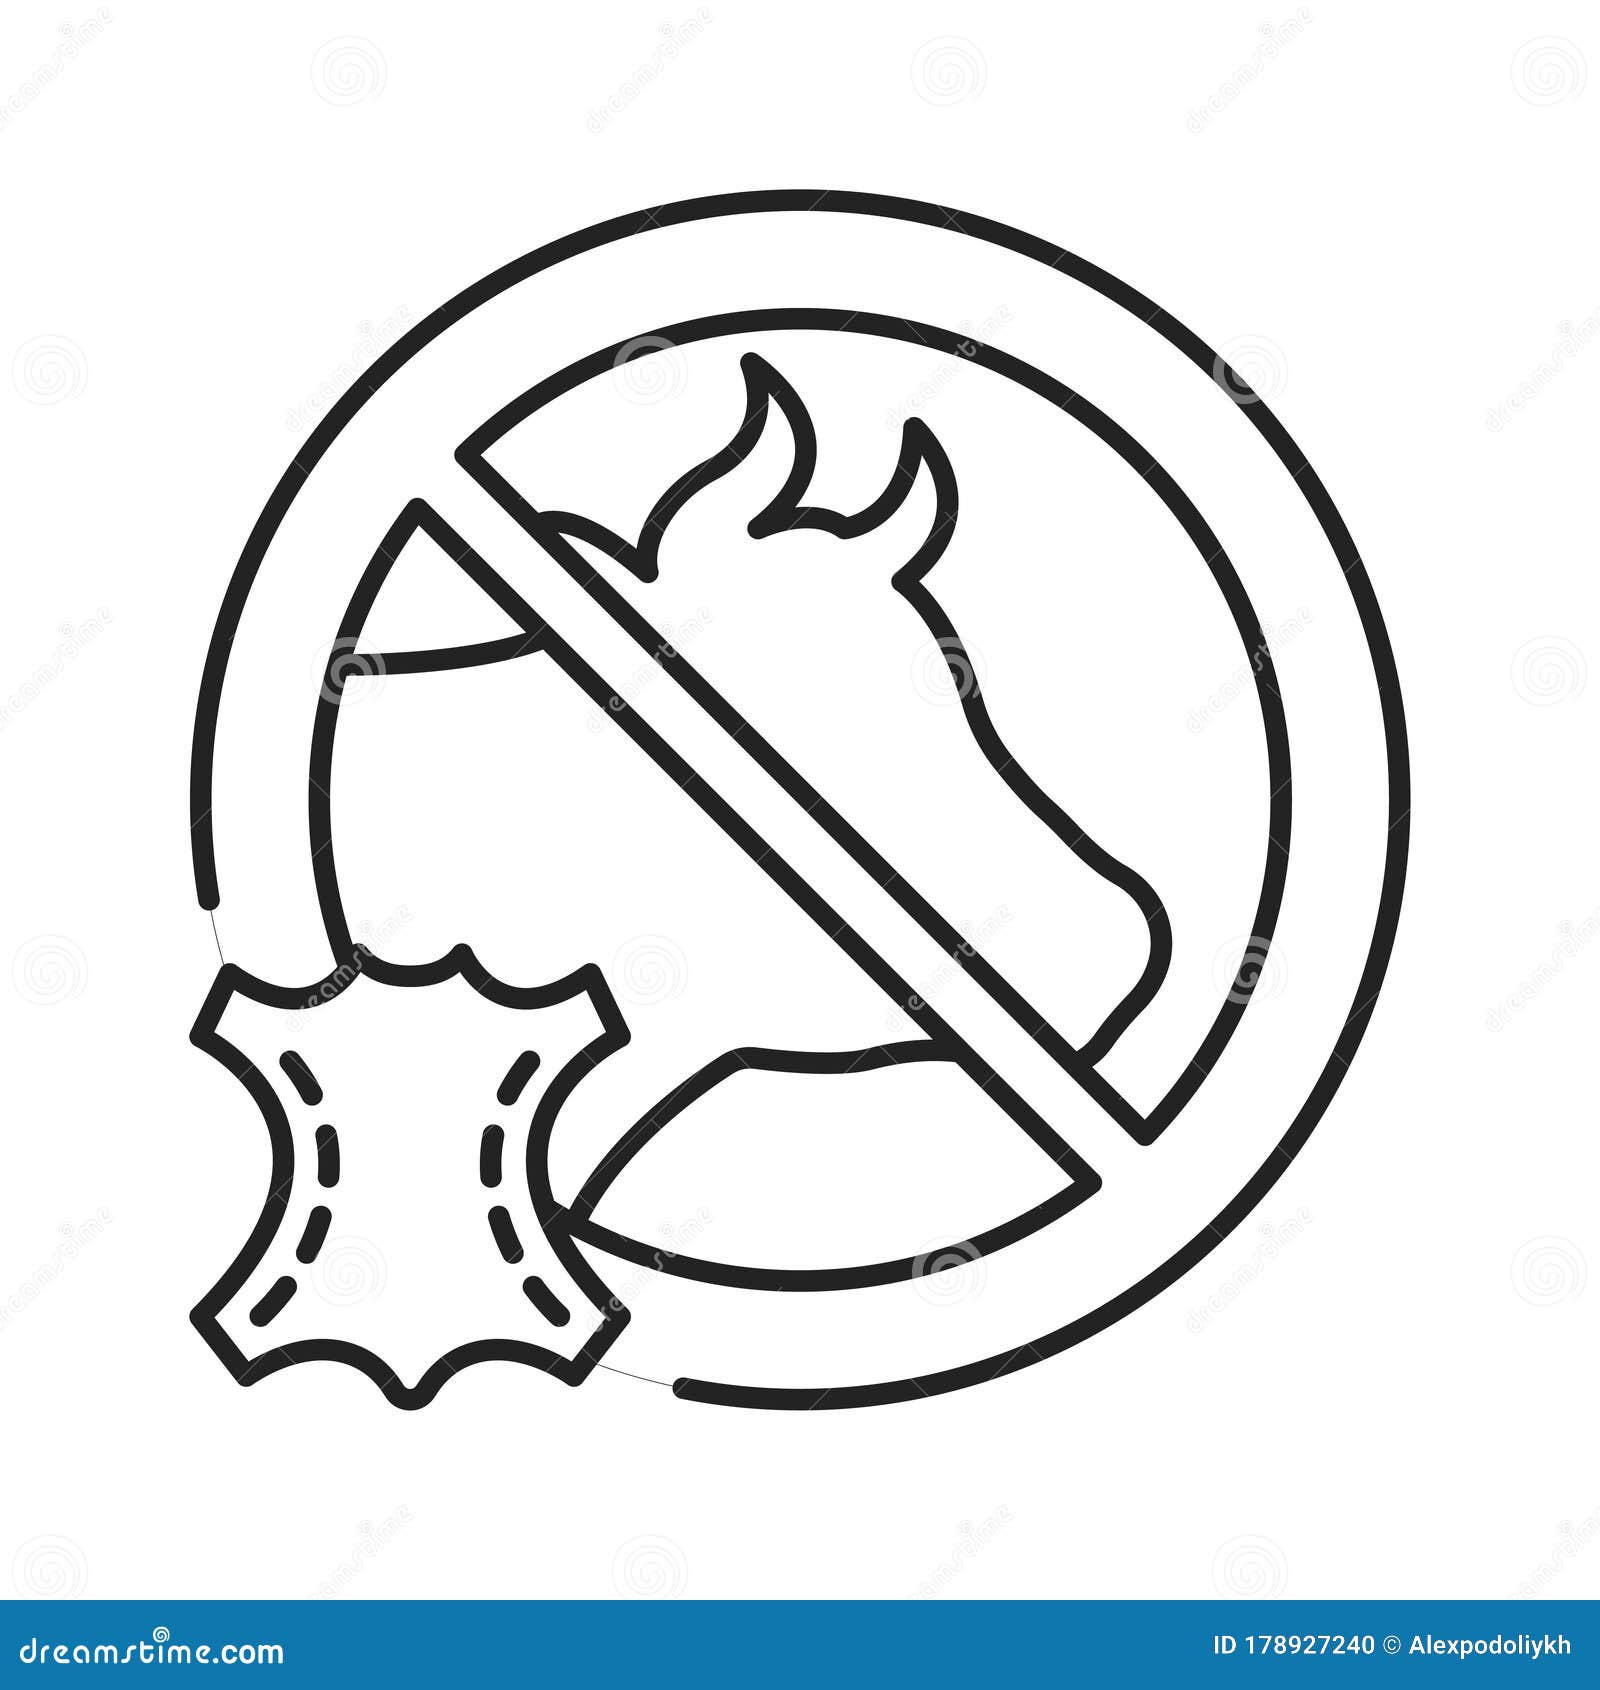 Cruelty Free Black Line Icon. Label for Products or Activities that Do Not  Harm or Kill Animals Stock Illustration - Illustration of flat, fabric:  178927240